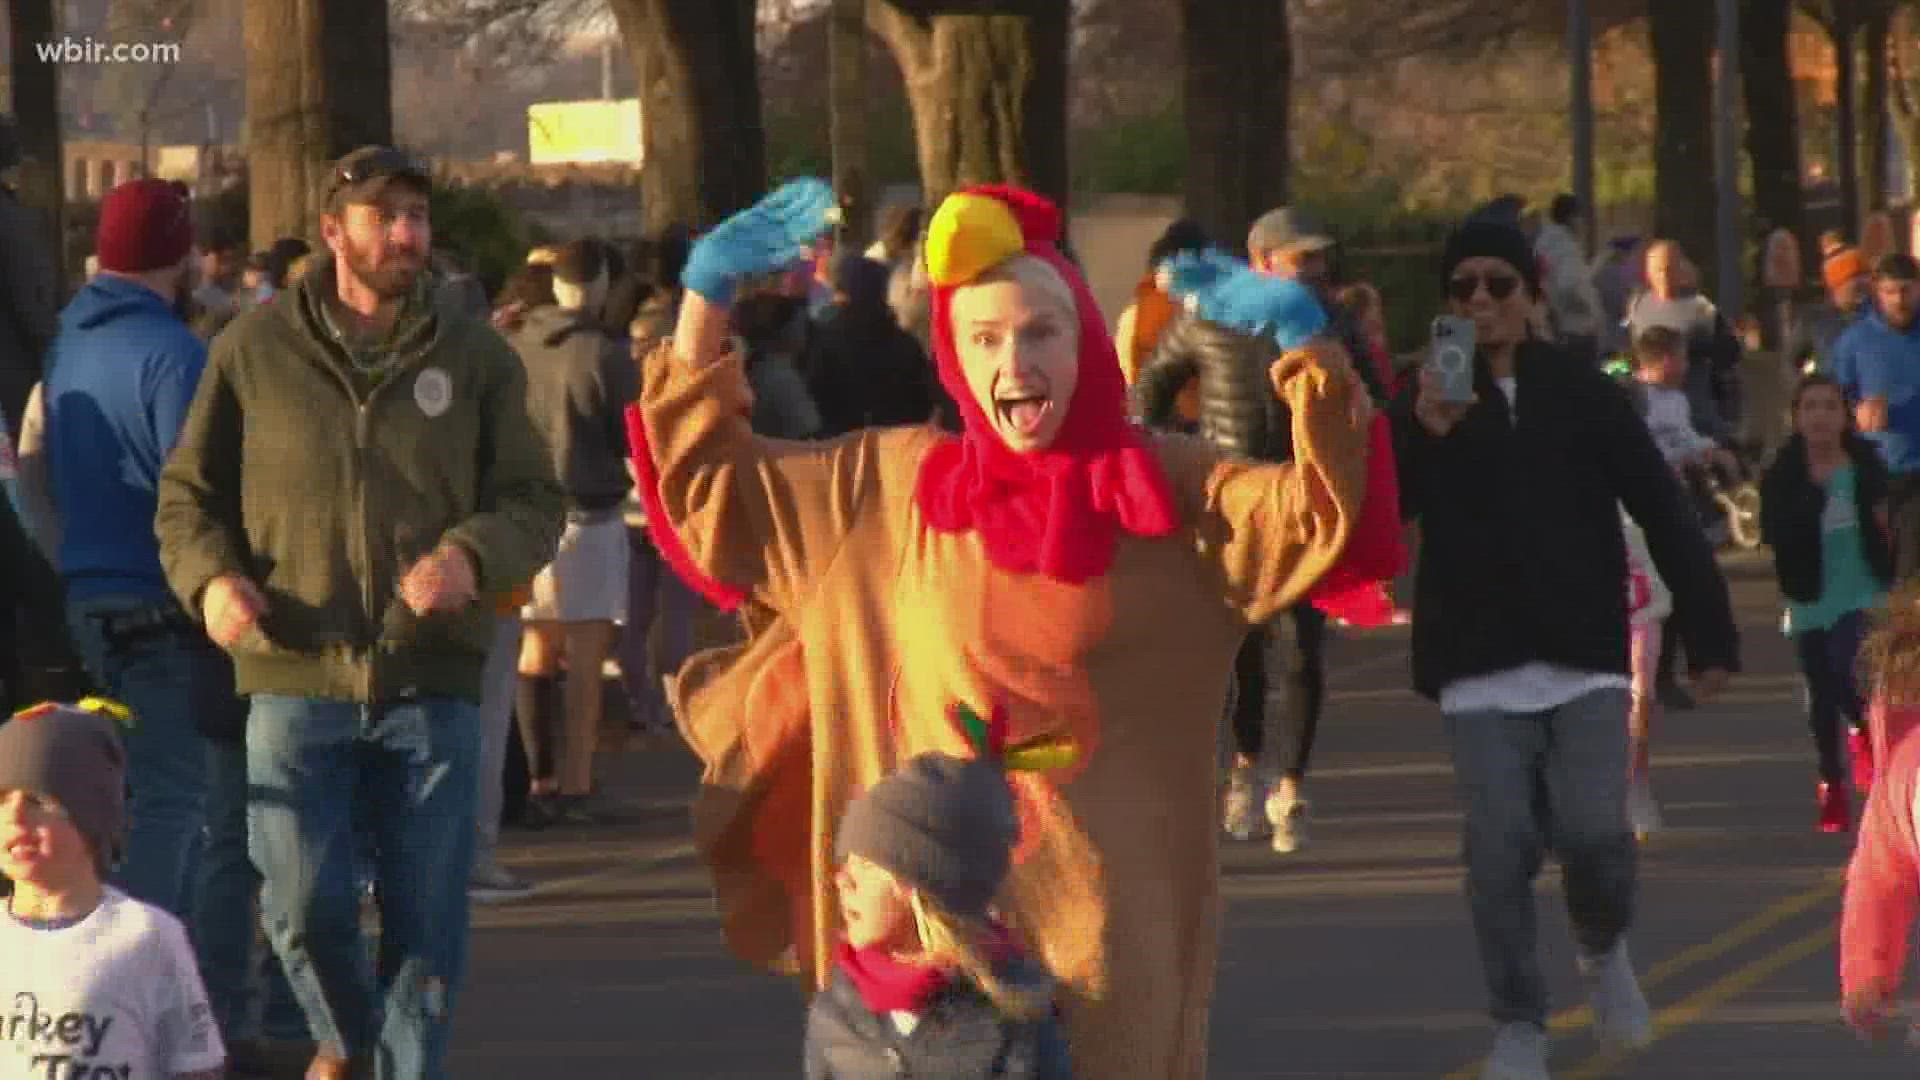 Runners will likely need to sprint through downtown Knoxville in cold temperatures, making room in their bellies for a Thanksgiving meal.